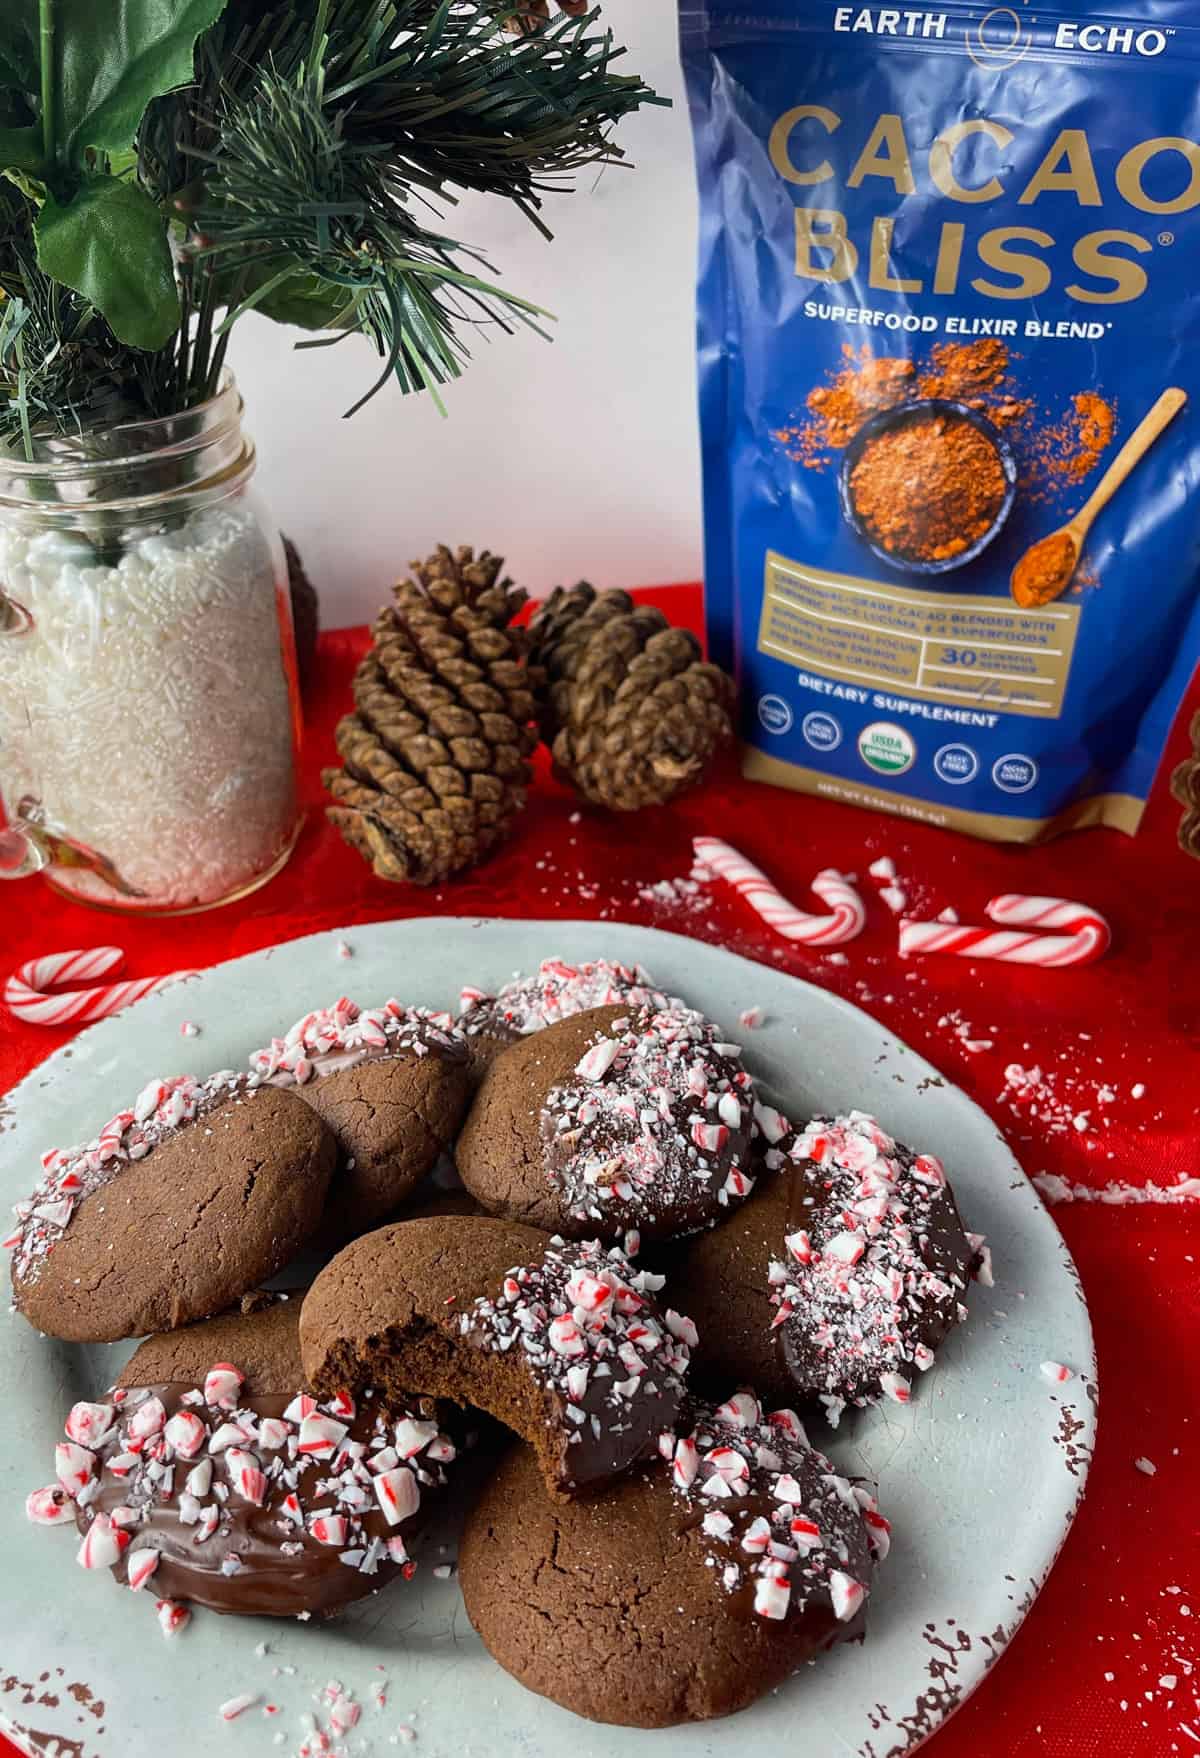 Chocolate peppermint cookies made with Cacao Bliss superfood elixir blend.